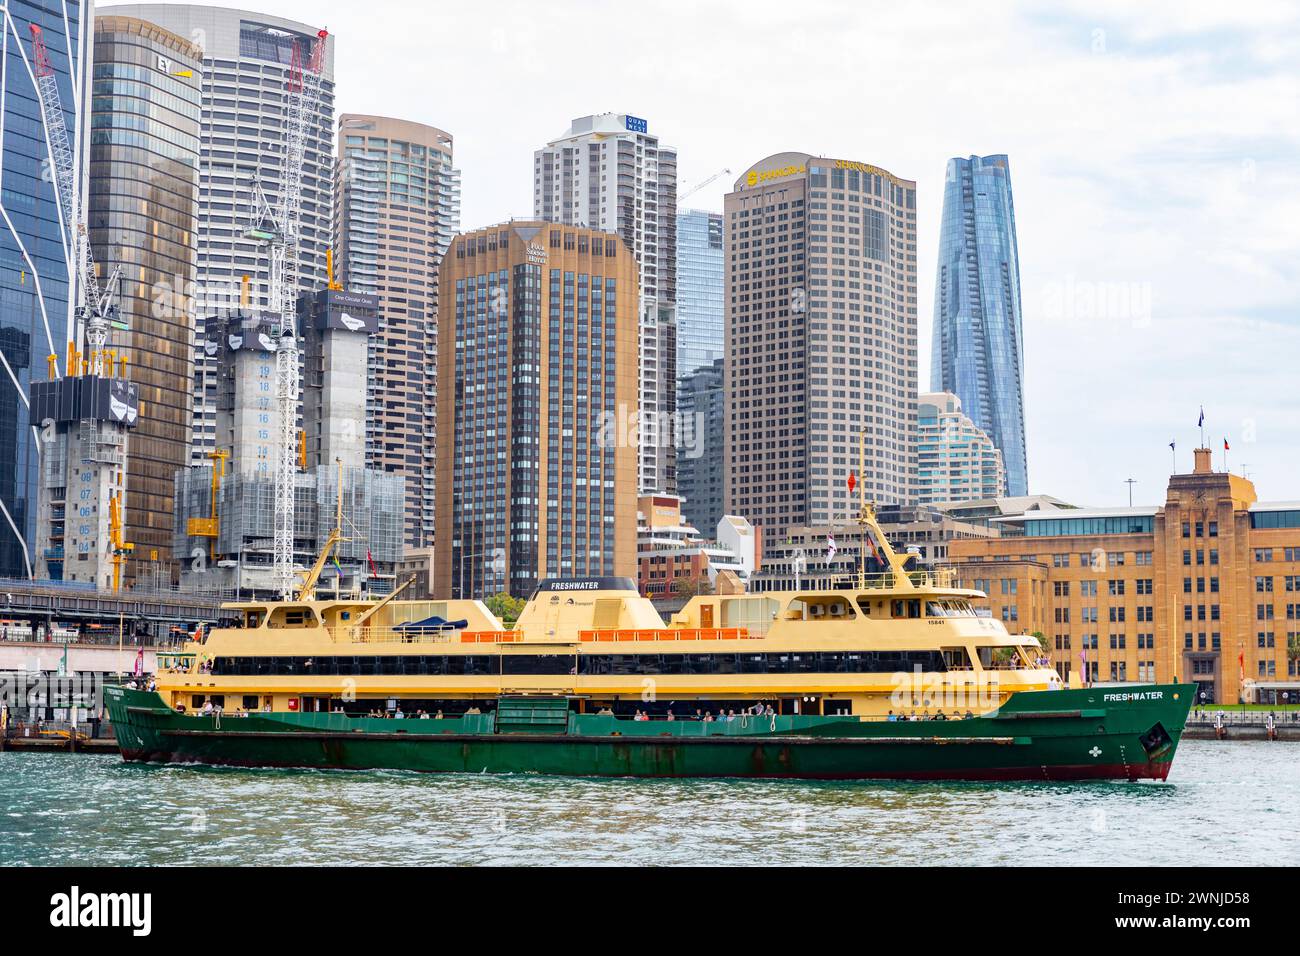 Sydney ferry, the MV Freshwater Manly ferry, departs Circular Quay on route to Manly Sydney Australia Stock Photo